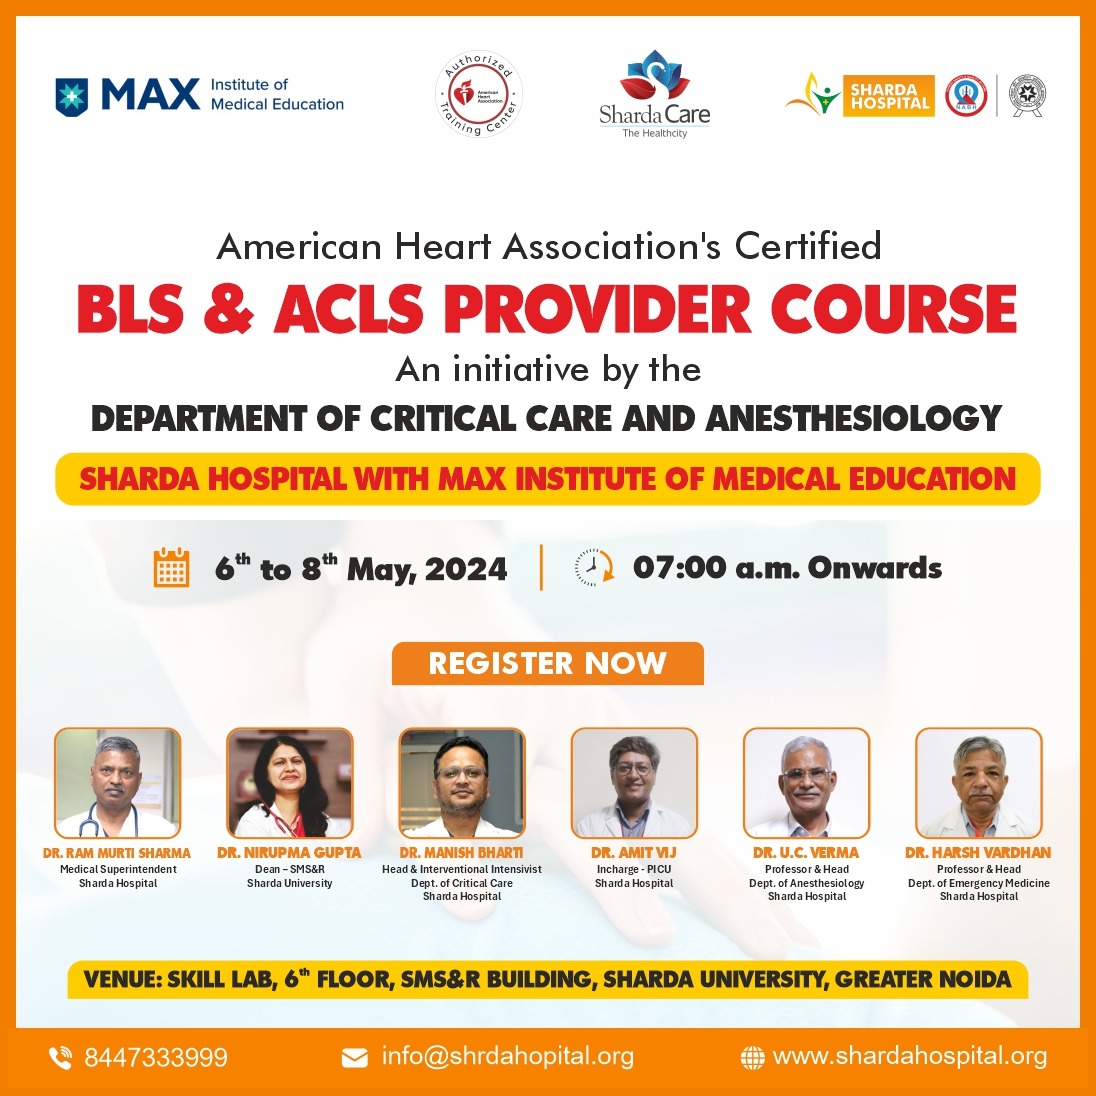 Sharda Hospital & Max Institute of Medical Education are hosting a training session on American Heart Association's BLS & ACLS courses from May 6th to 8th, 2024. Join to enhance life-saving skills under expert guidance.
#LifesavingSkills #BLS #ACLS